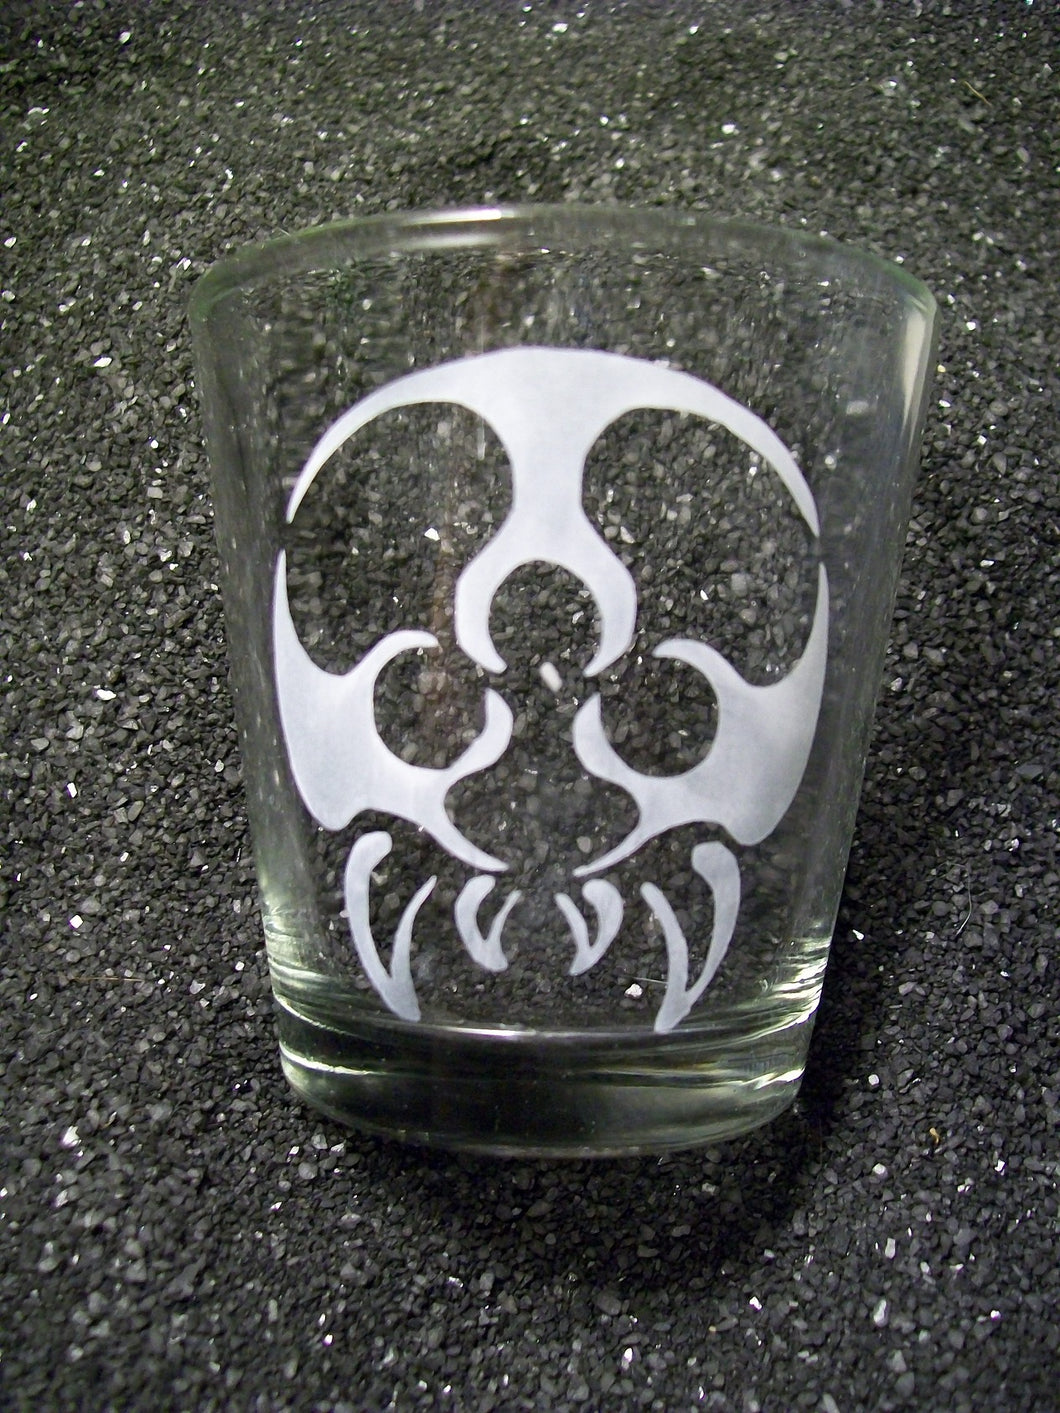 An extra large shot glass that is etched with a tattoo-style metroid monster. It has a round body (no head) with three eyeballs and four fangs. 